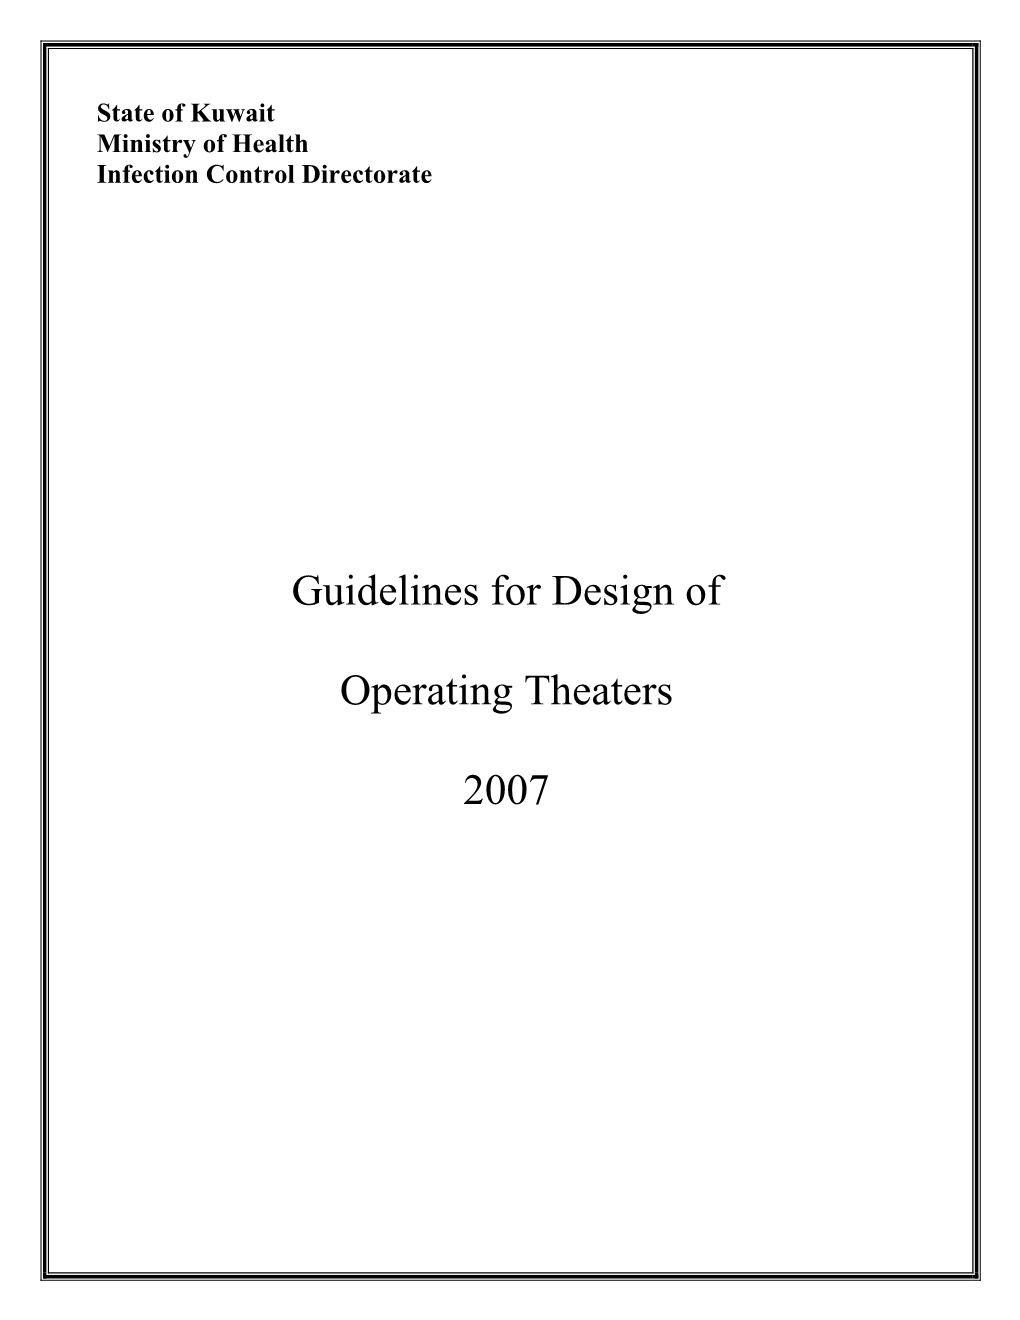 Guidelines for Design of Operating Theaters 2007